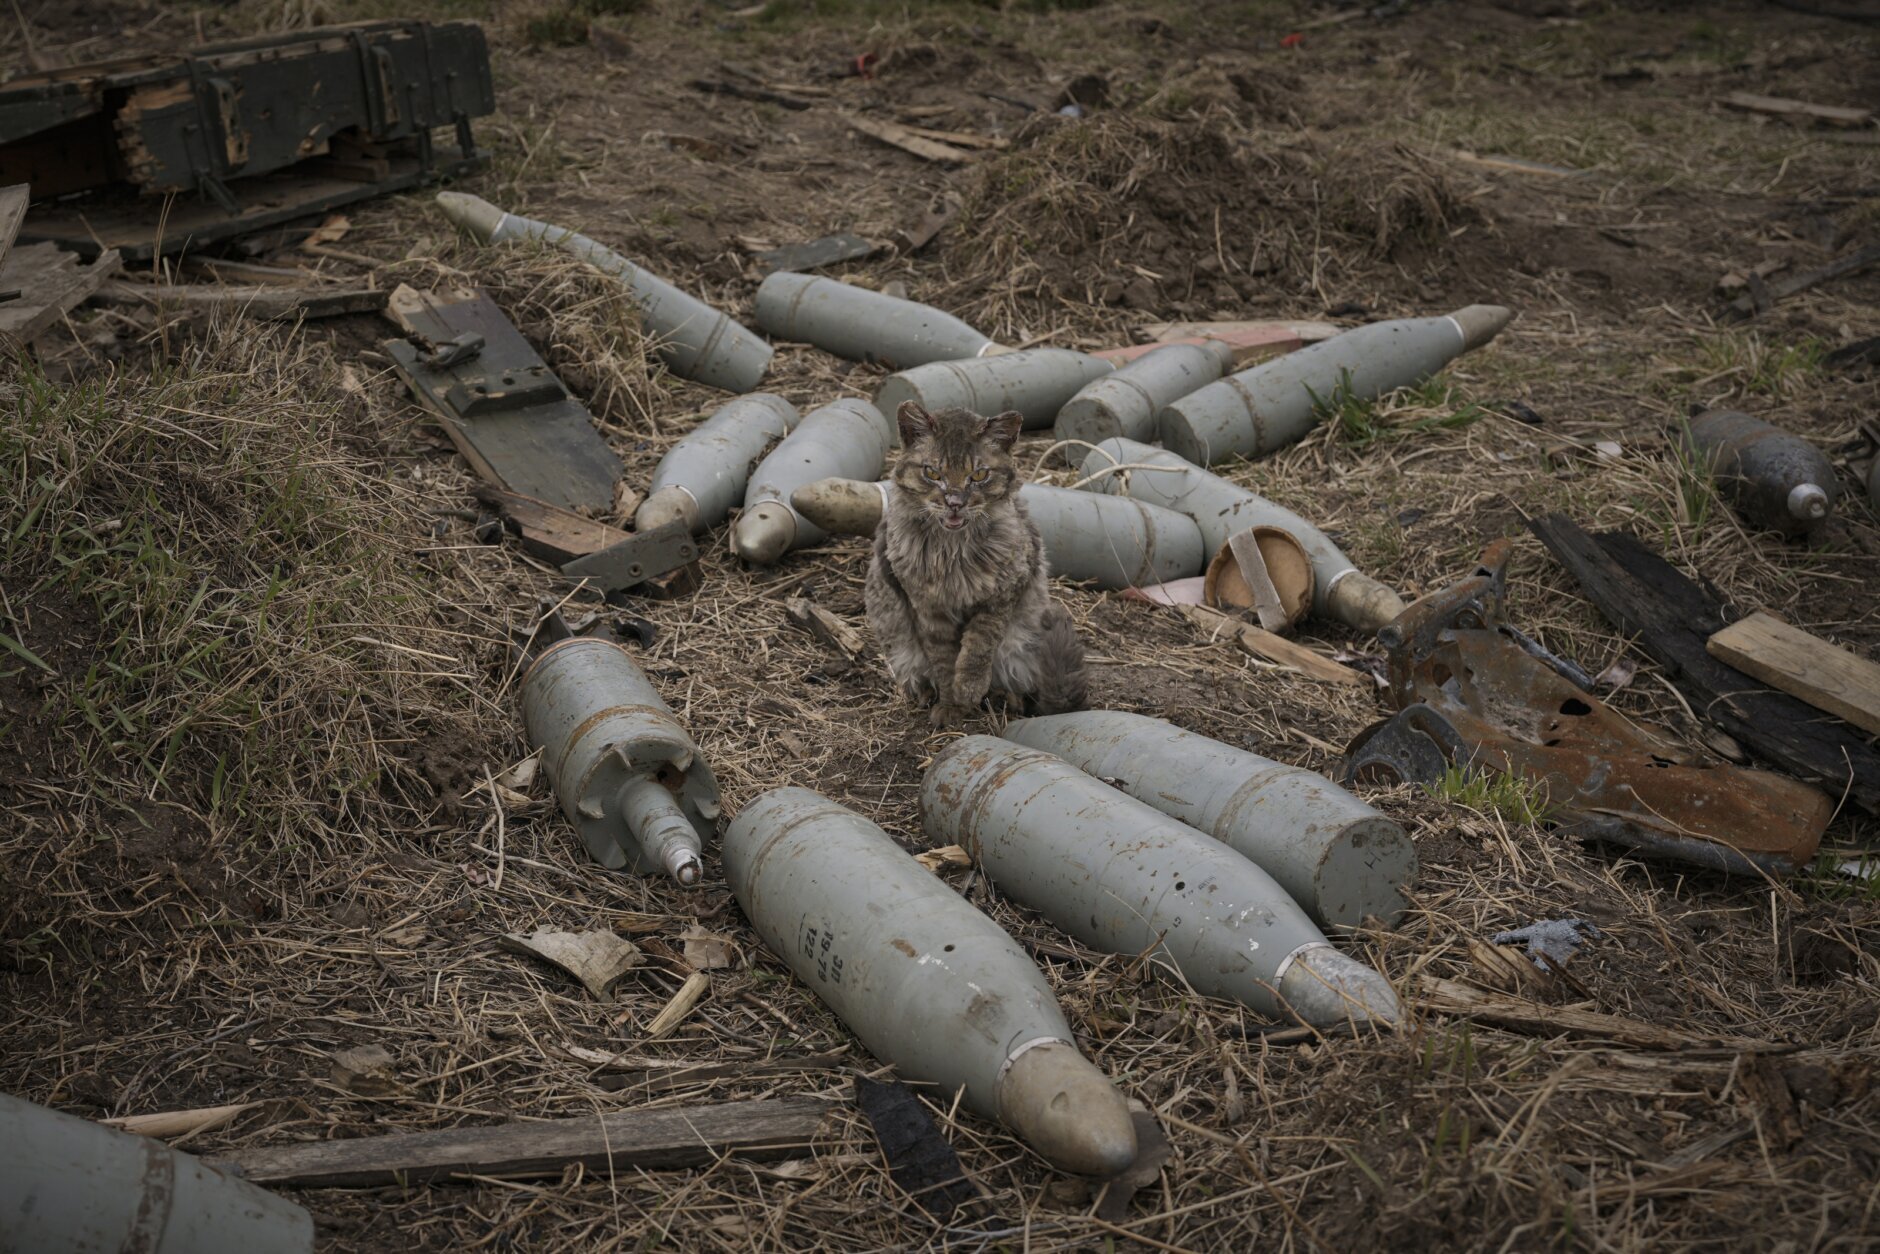 A cat sits between large caliber rounds of ammunition abandoned by retreating Russian forces or retrieved from destroyed fighting vehicles in the village of Andriivka, Ukraine, heavily affected by fighting between Russian and Ukrainian forces, Wednesday, April 6, 2022. Several buildings in the village were reduced to mounds of bricks and corrugated metal and residents struggle without heat, electricity or cooking gas. (AP Photo/Vadim Ghirda)